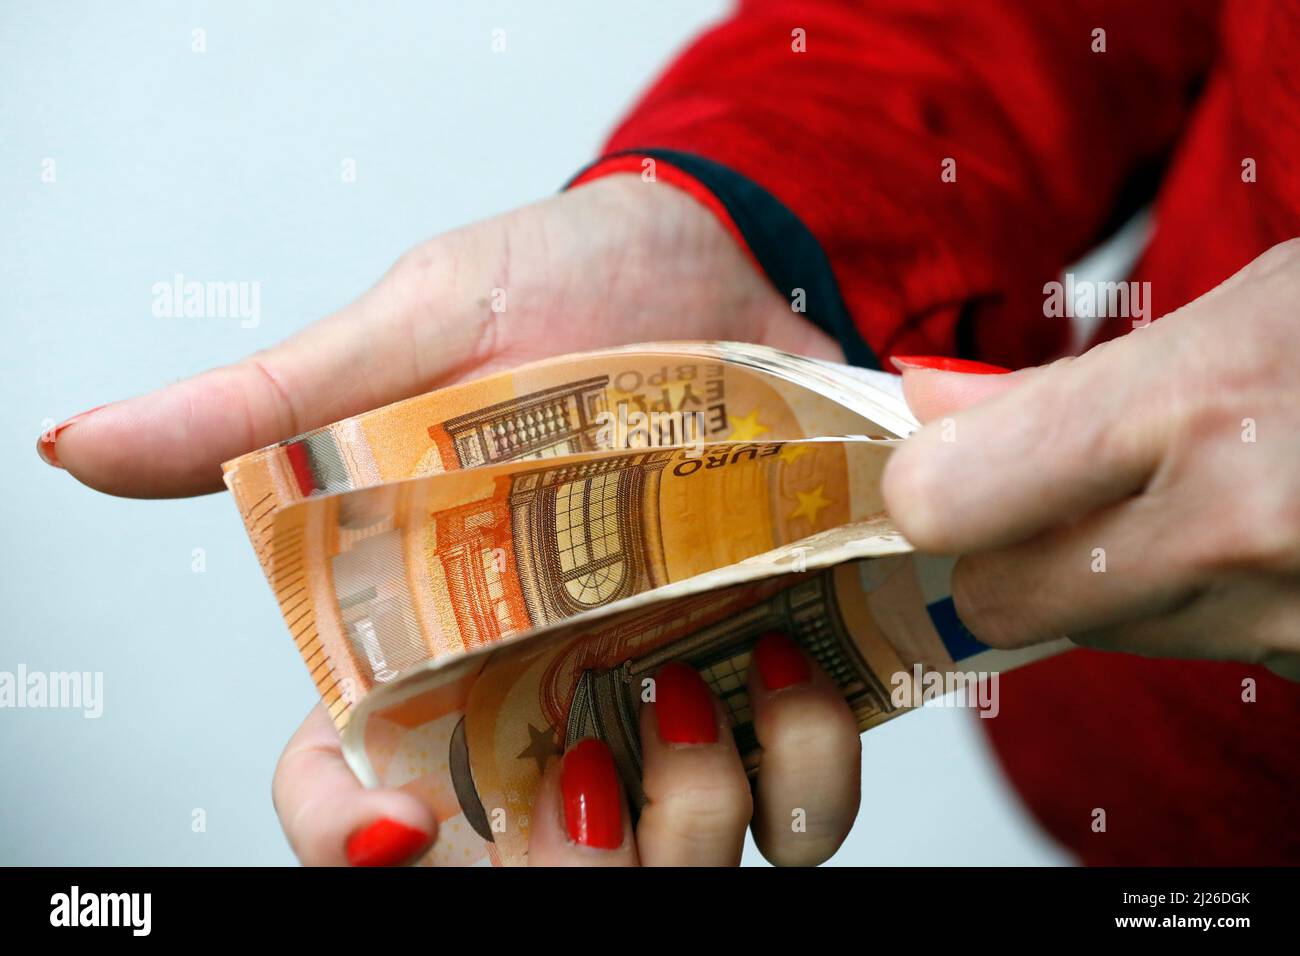 Woman hands holding euro currency money banknotes. Payment and cash concept. Illegal money and  greed concept. Stock Photo